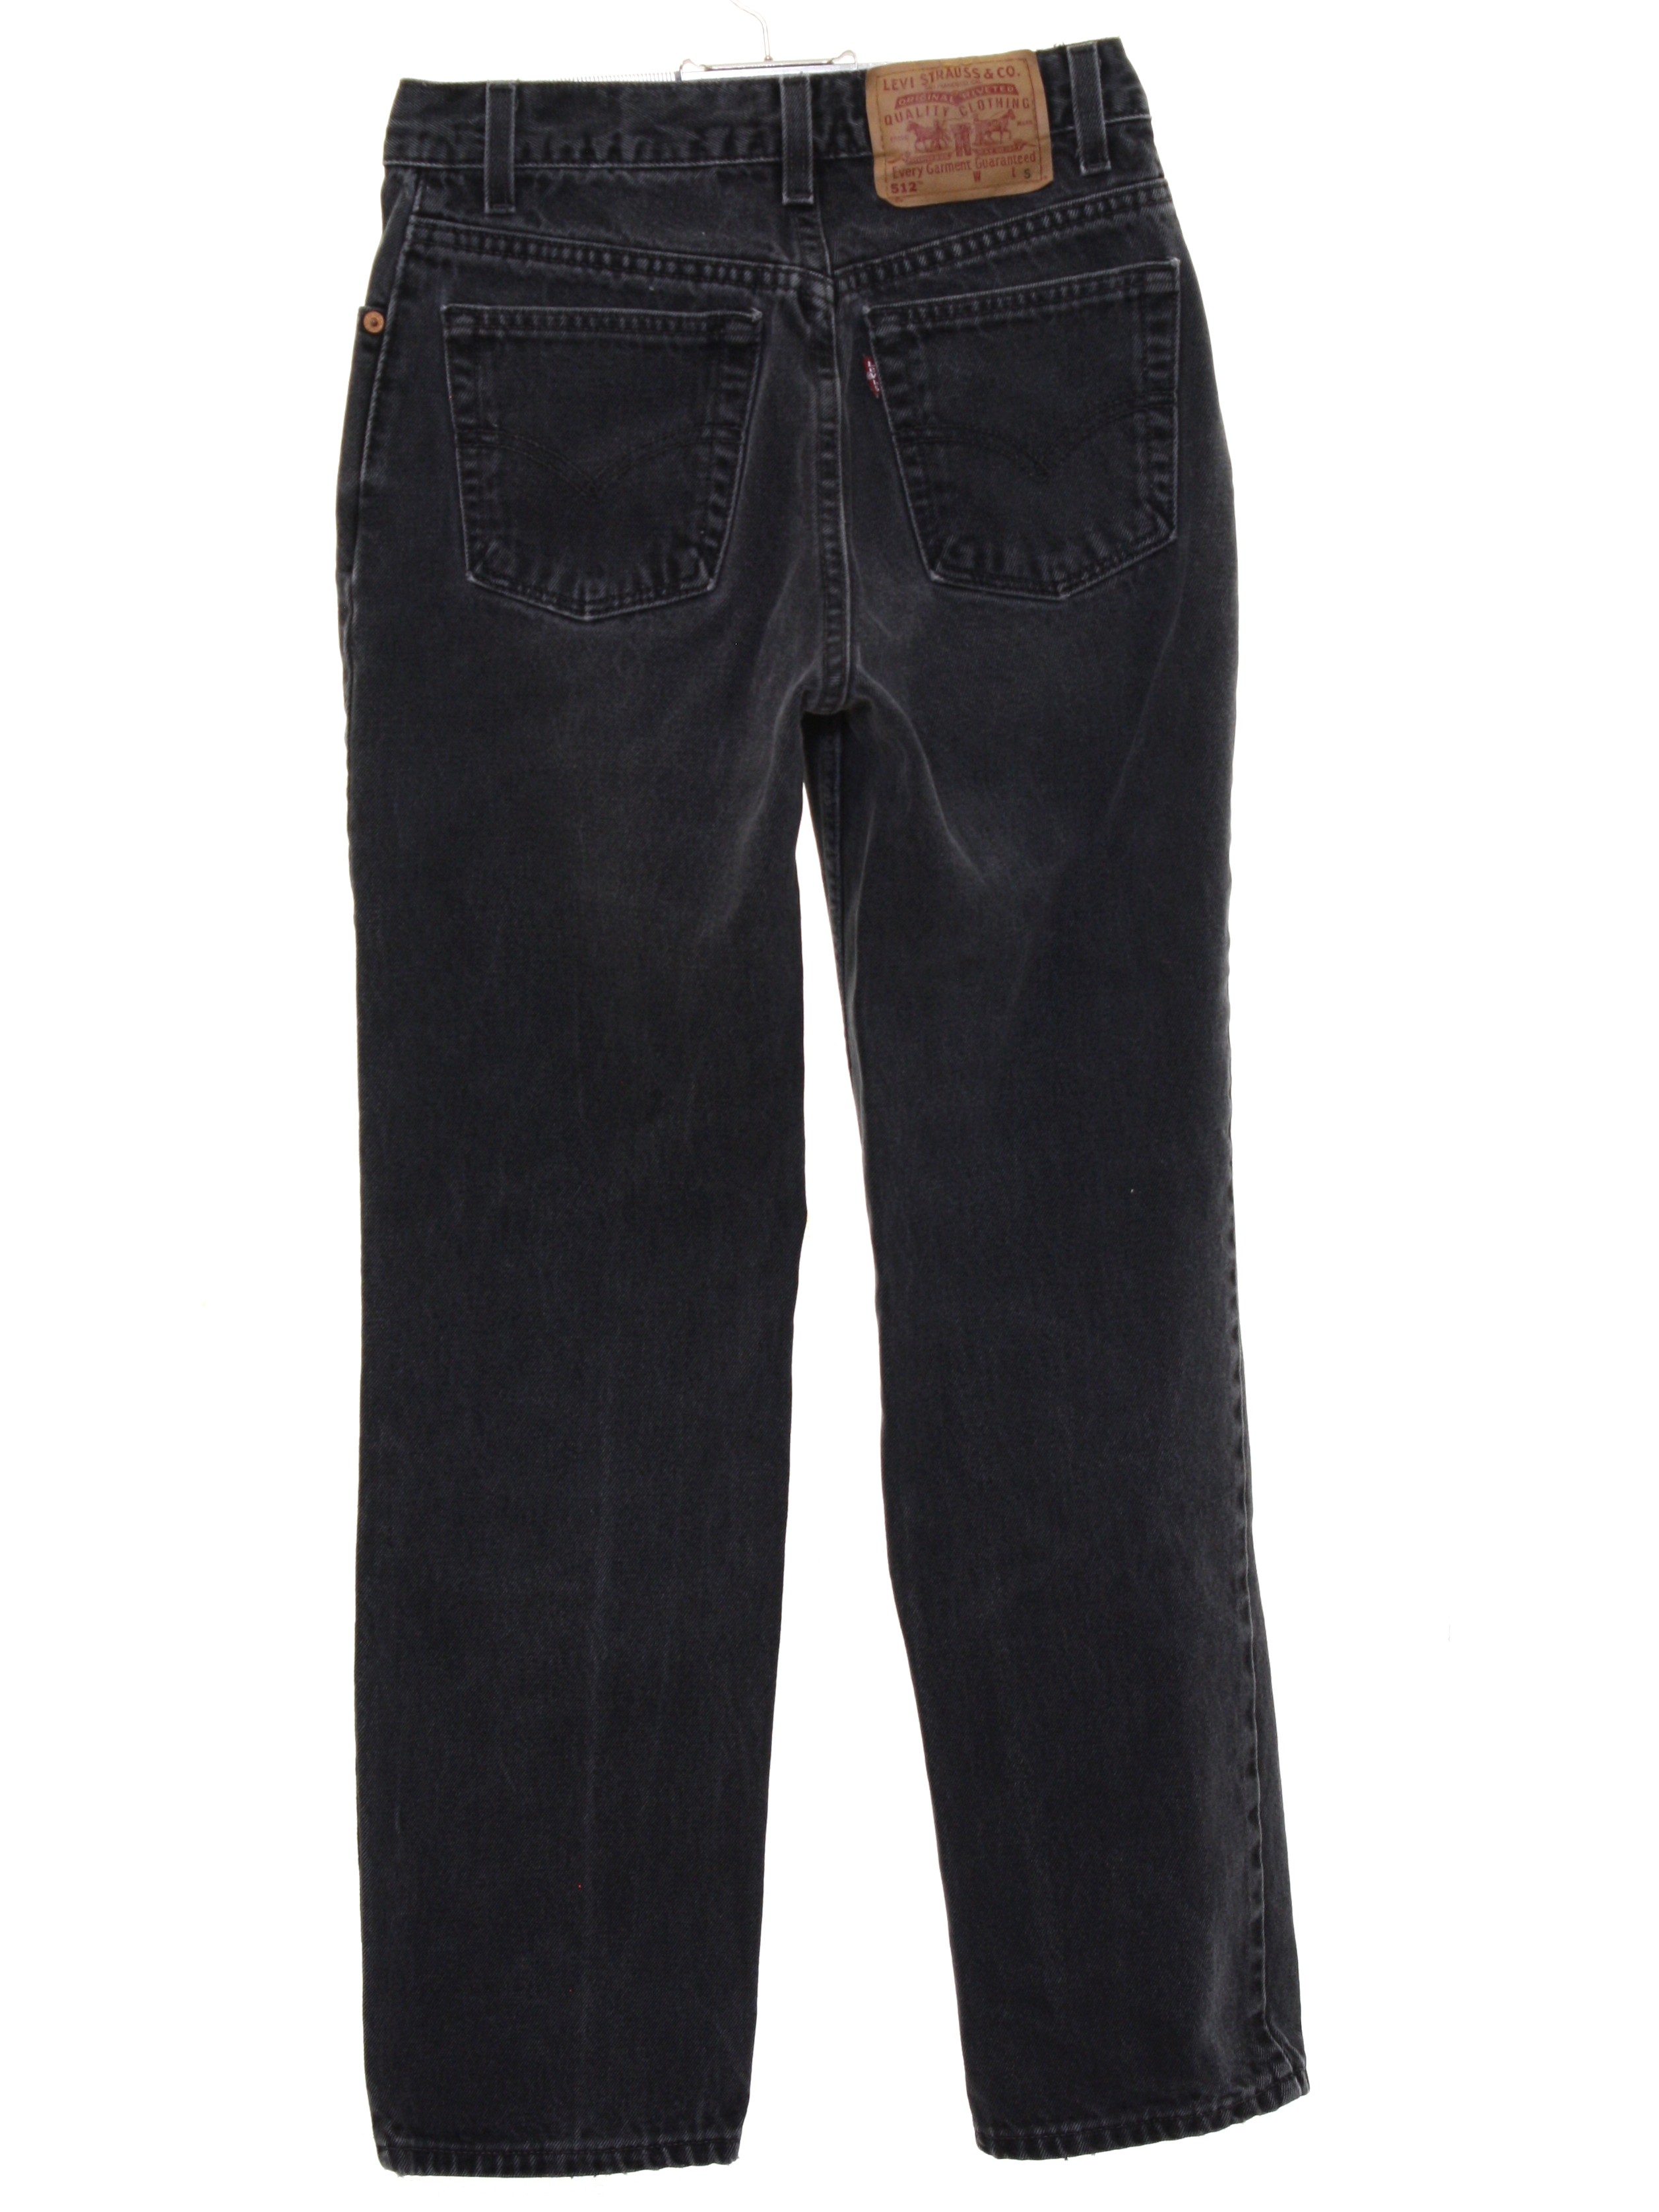 foretage hjem forværres Retro Eighties Pants: 80s -Levis 512- Womens faded black cotton denim levis  512 slim fit straight leg denim jeans pants with zipper fly closure with  button. Five pocket style - front scoop